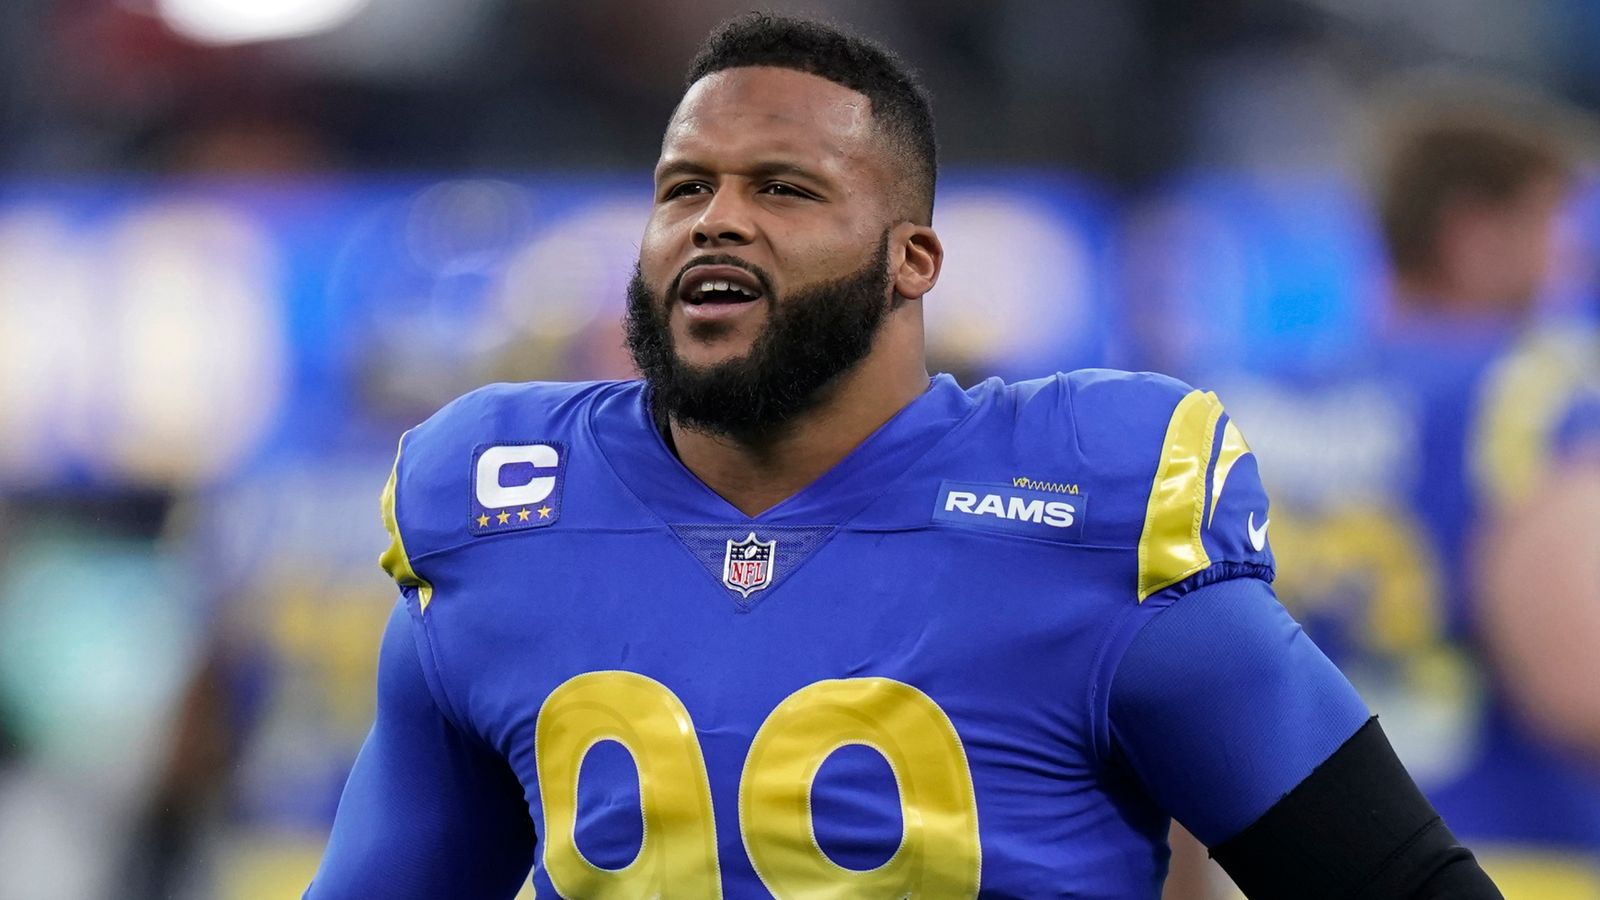 Aaron Donald ranked as No. 1 NFL player in PFF50 - Cardiac Hill